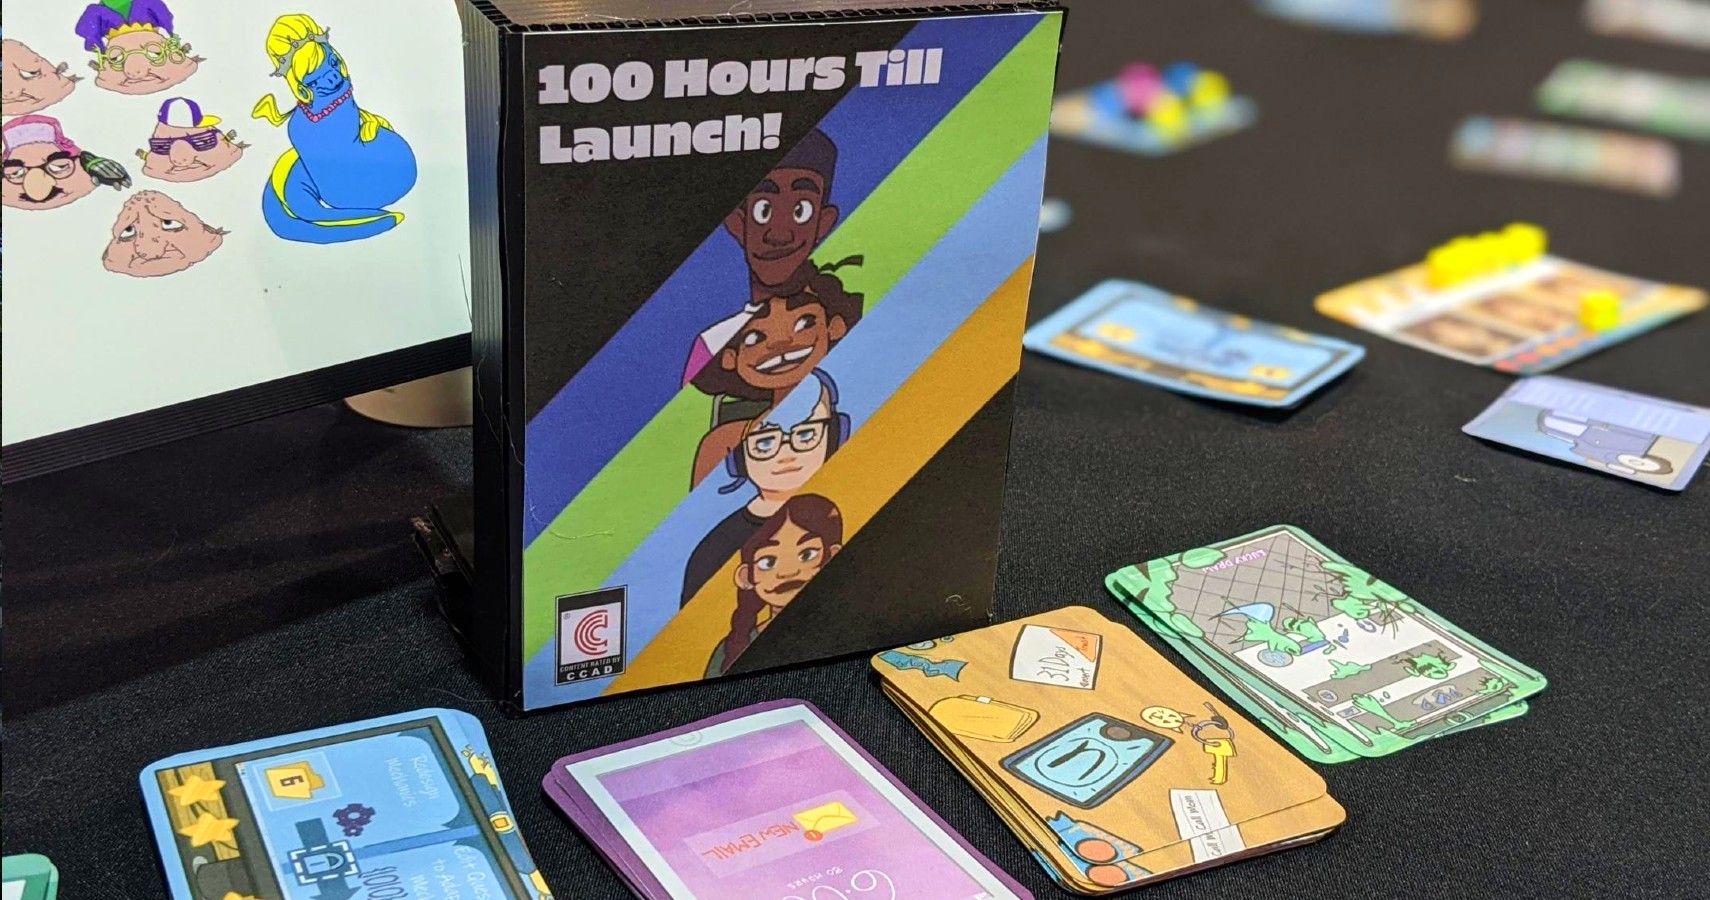 Colorful Vivid Boardgame on Black Table - 100 Hours Till Launch